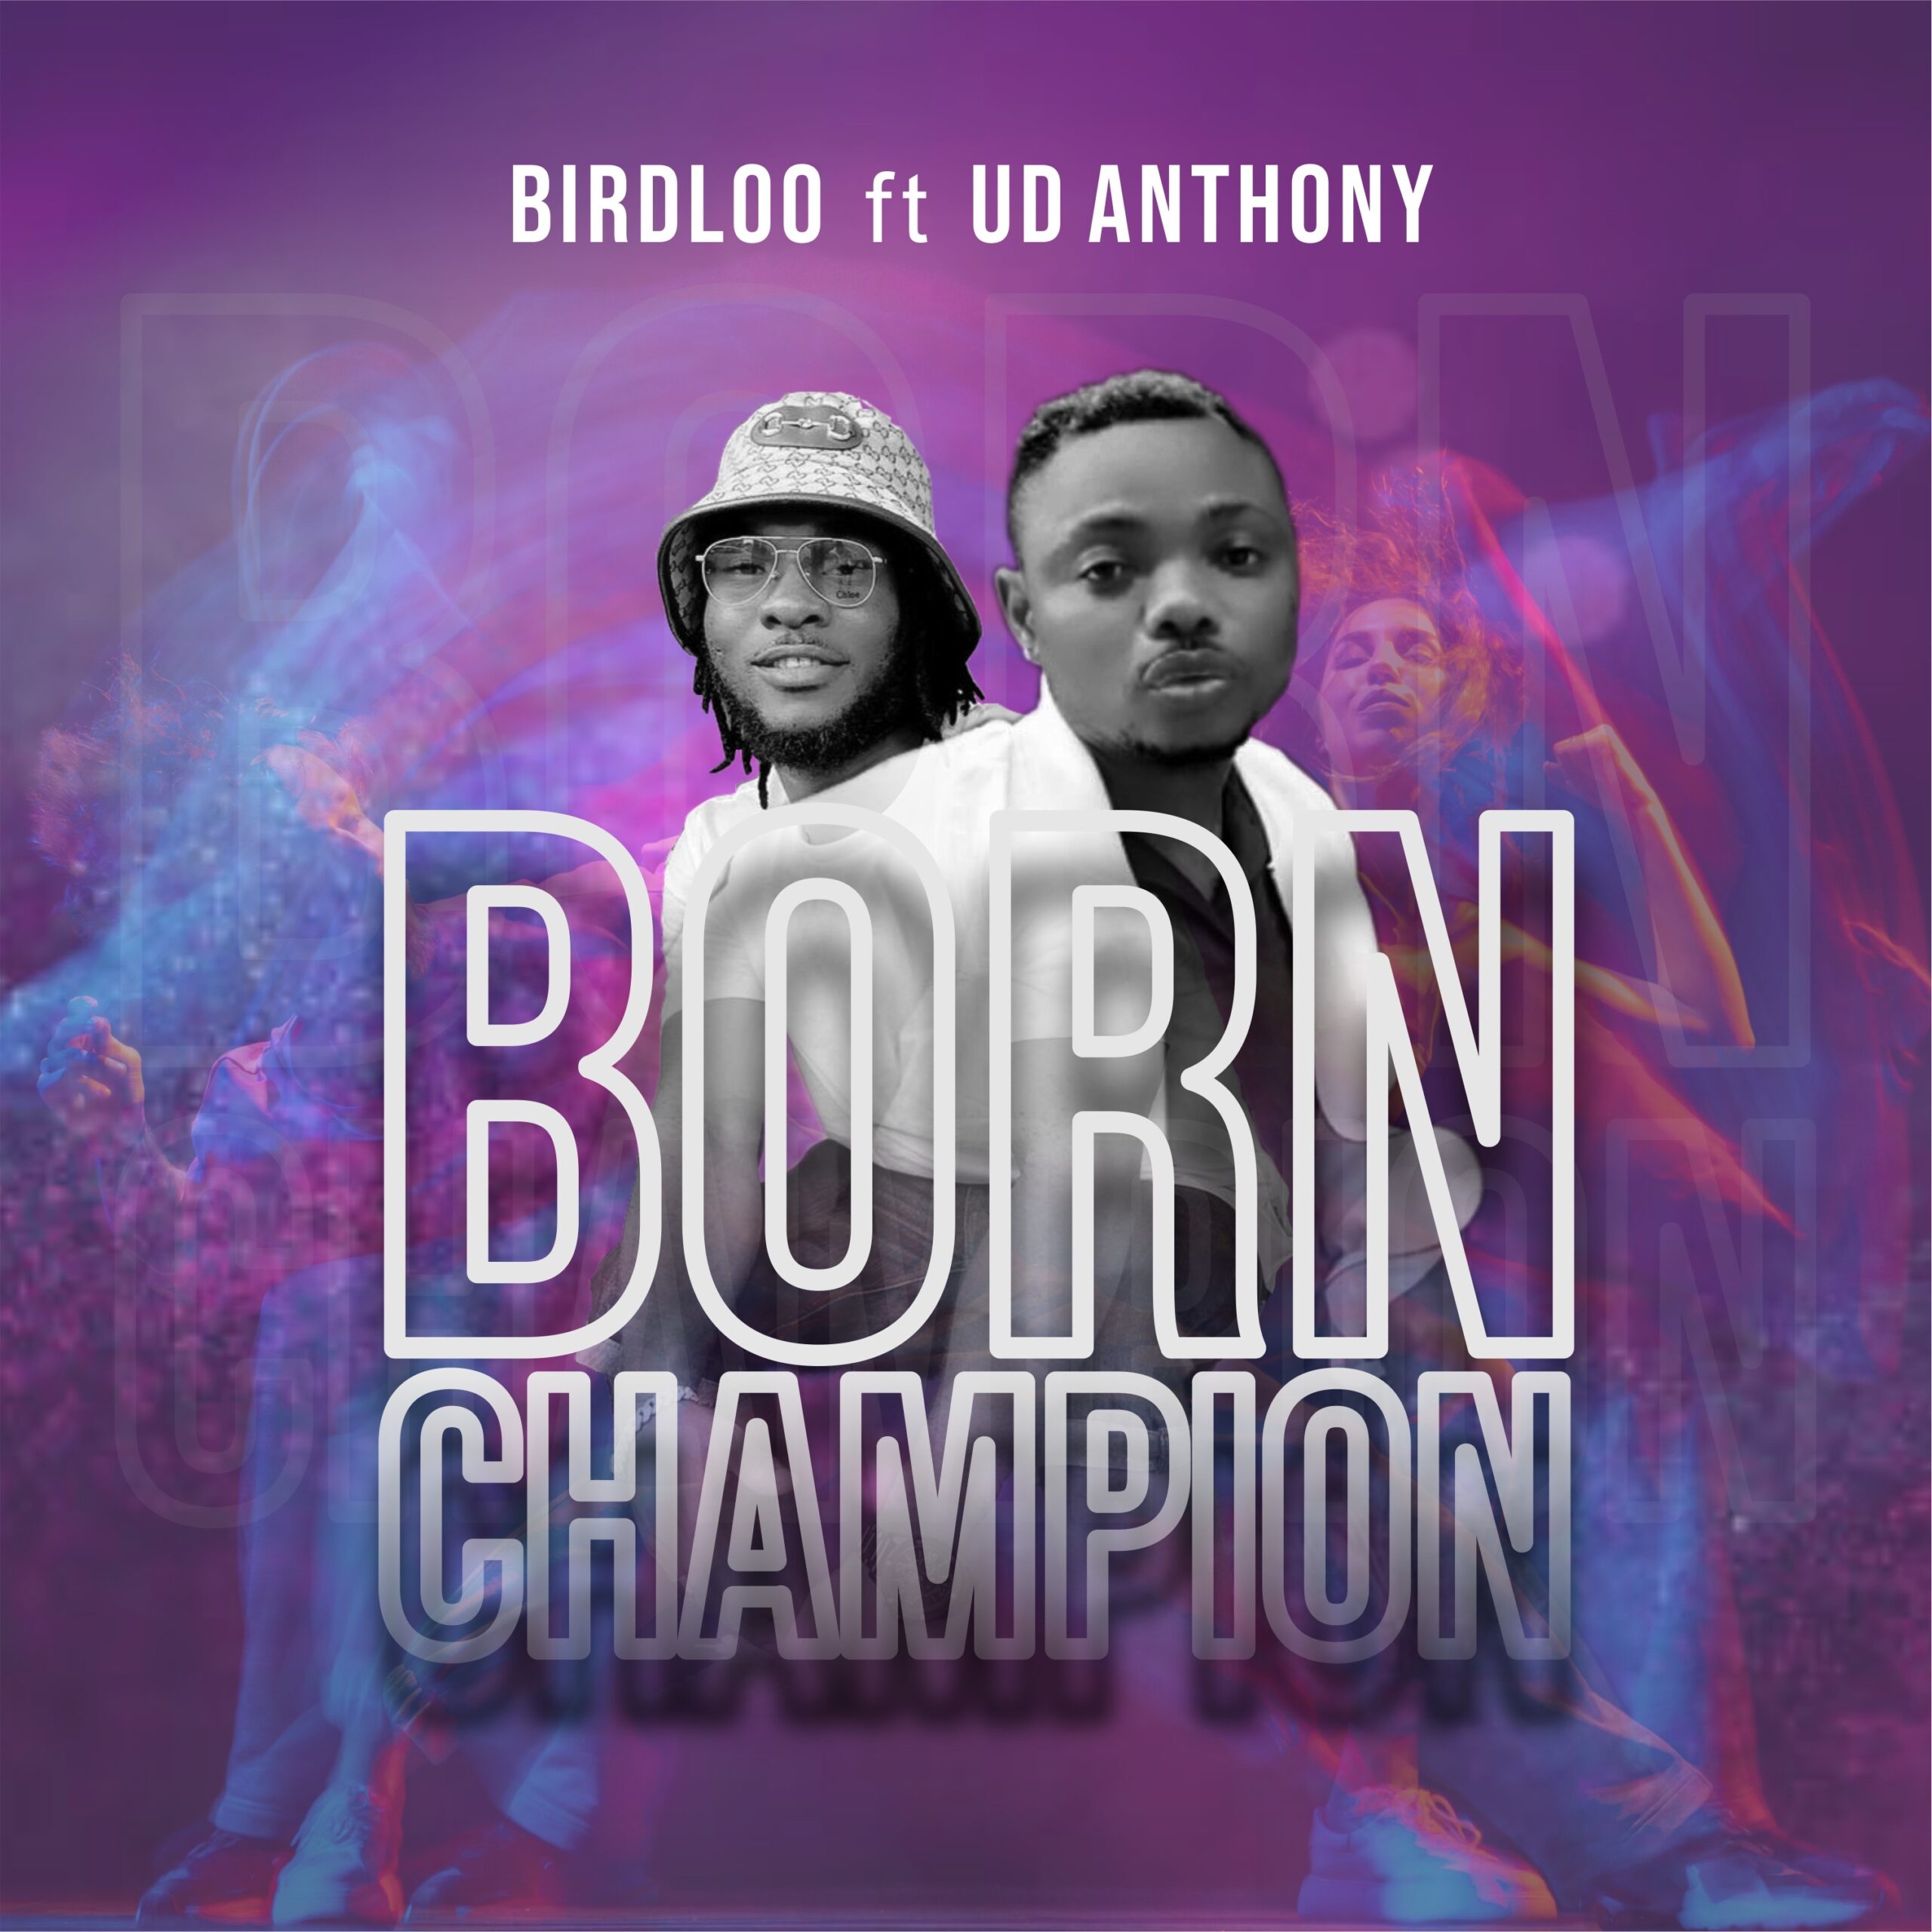 BirdLoo joins force with UD Anthony on new single BORN CHAMPION